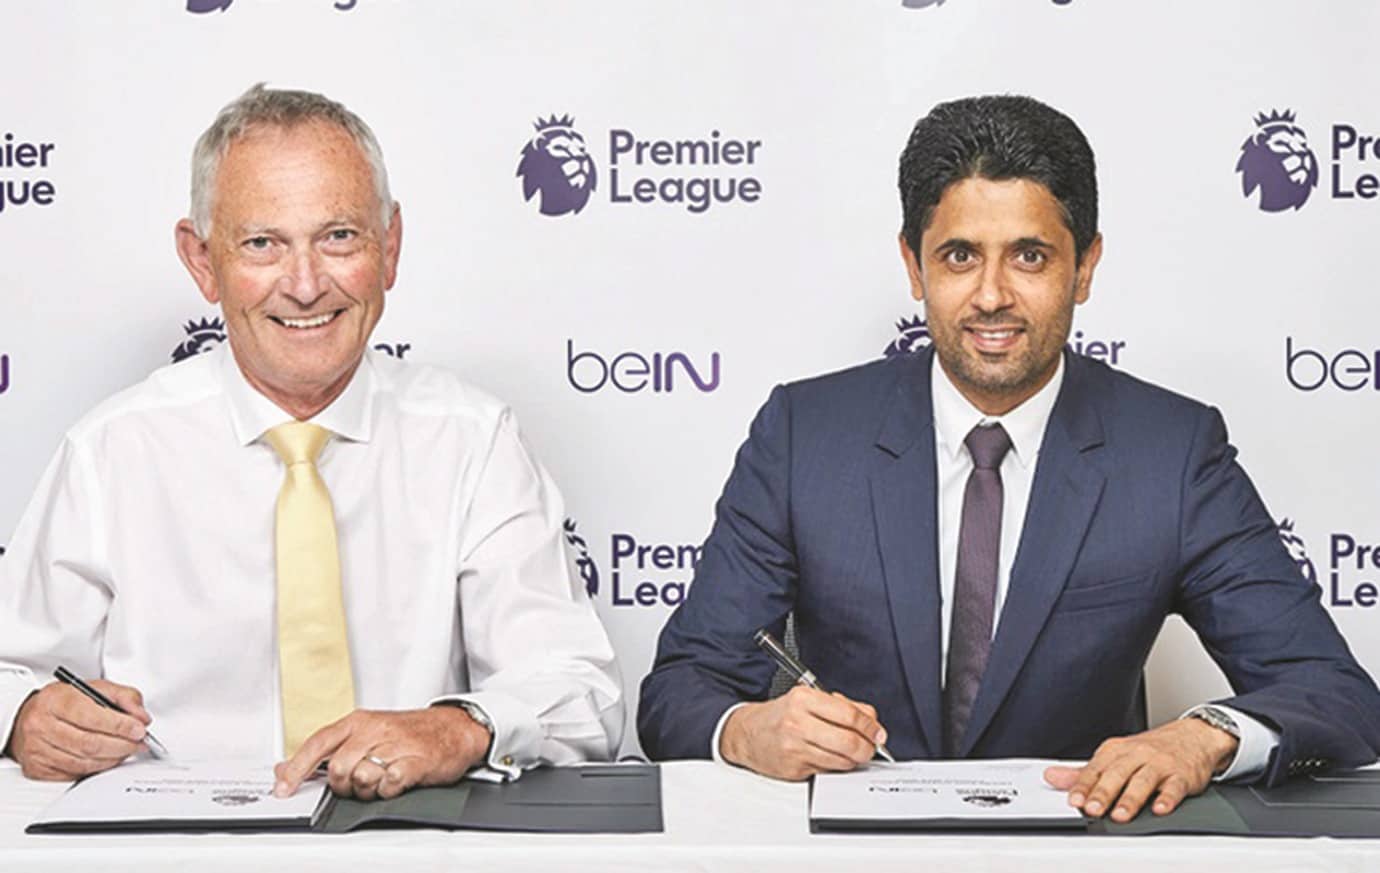 beIN Sports bags Mena media rights for Premier League matches